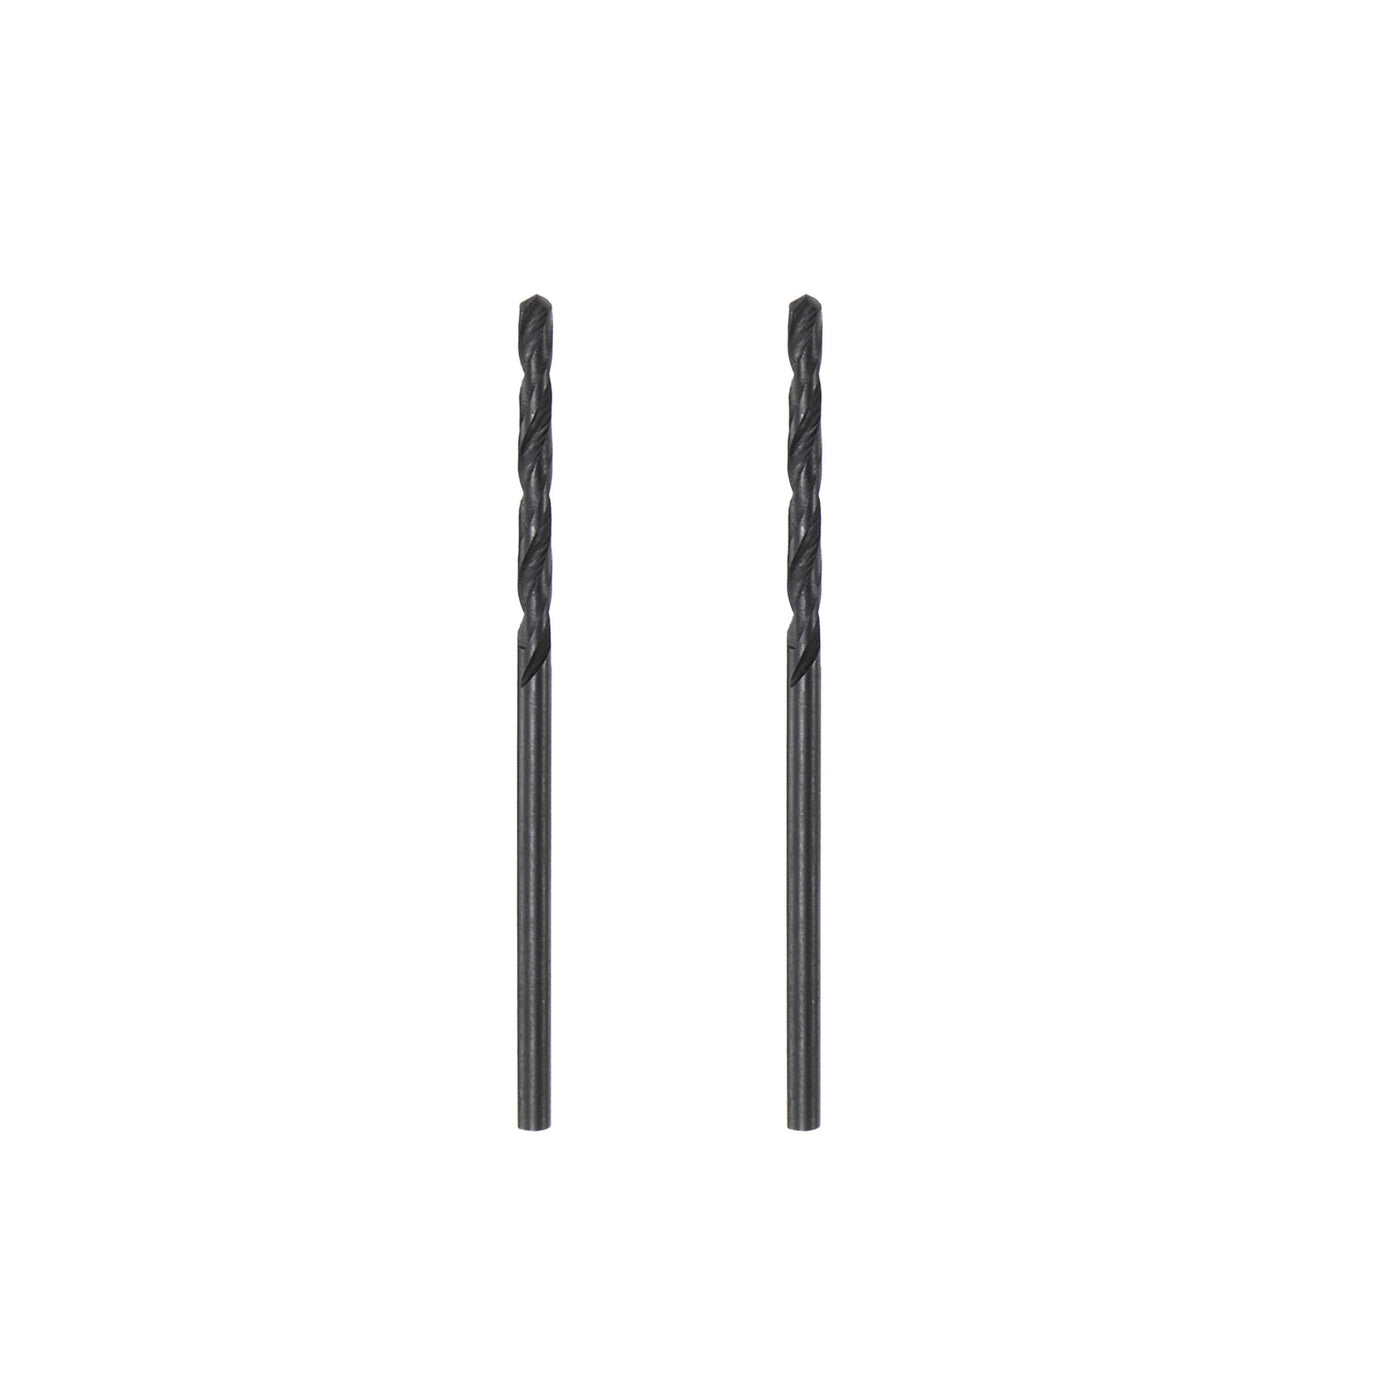 uxcell Uxcell High Speed Steel Twist Drill Bit, 1.7mm Fully Ground Black Oxide 42mm Long 2Pcs